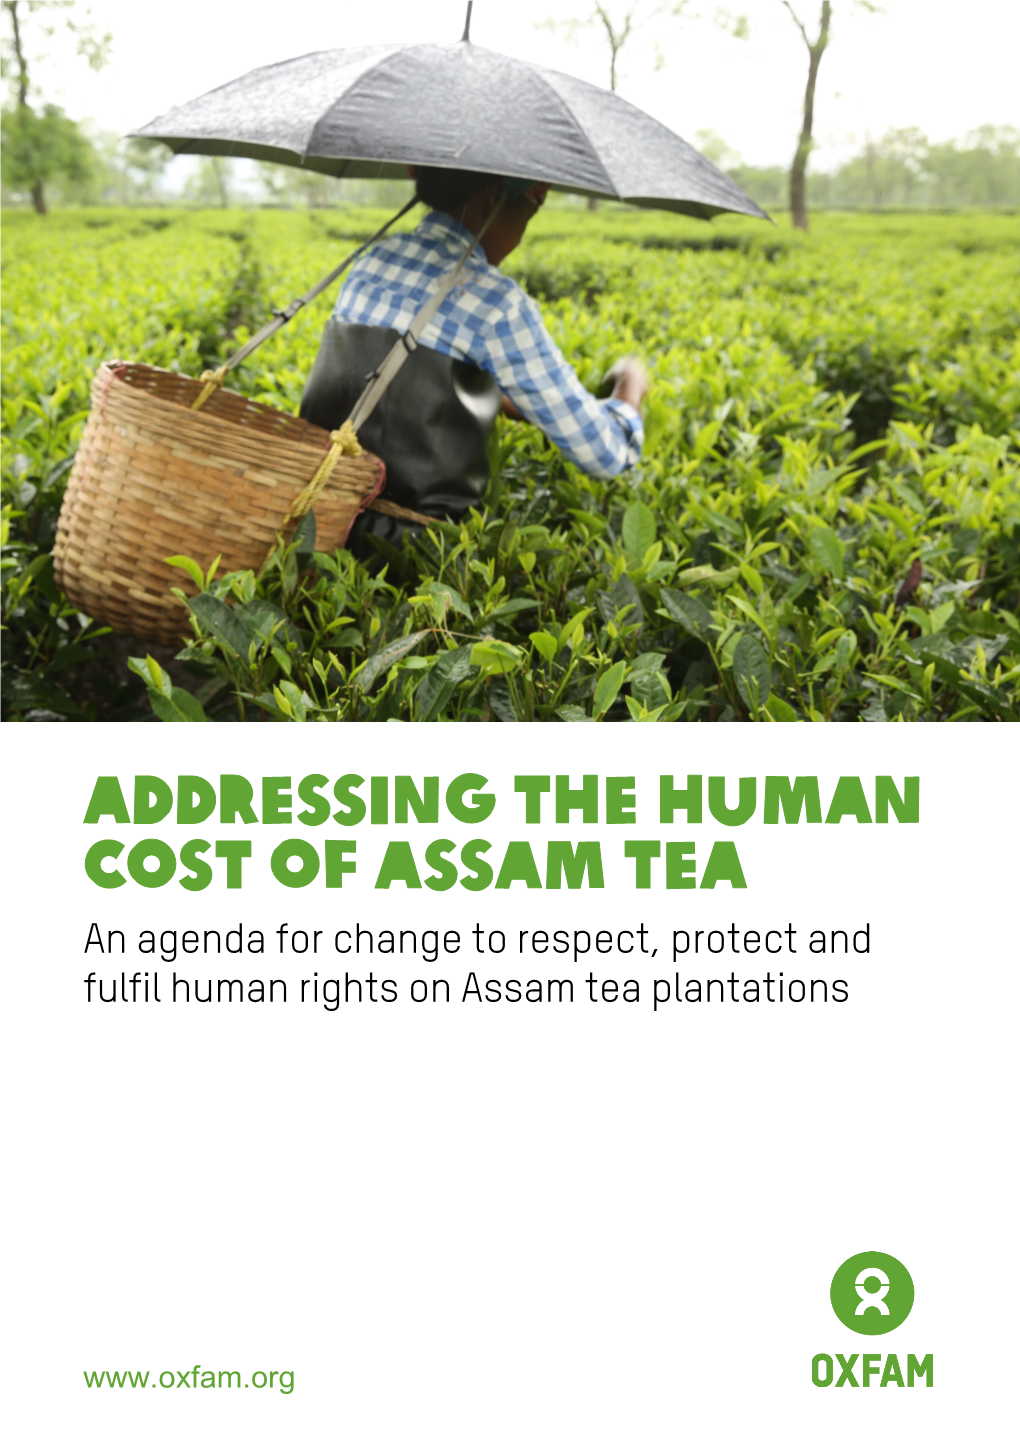 ADDRESSING the HUMAN COST of ASSAM TEA an Agenda for Change to Respect, Protect and Fulfil Human Rights on Assam Tea Plantations